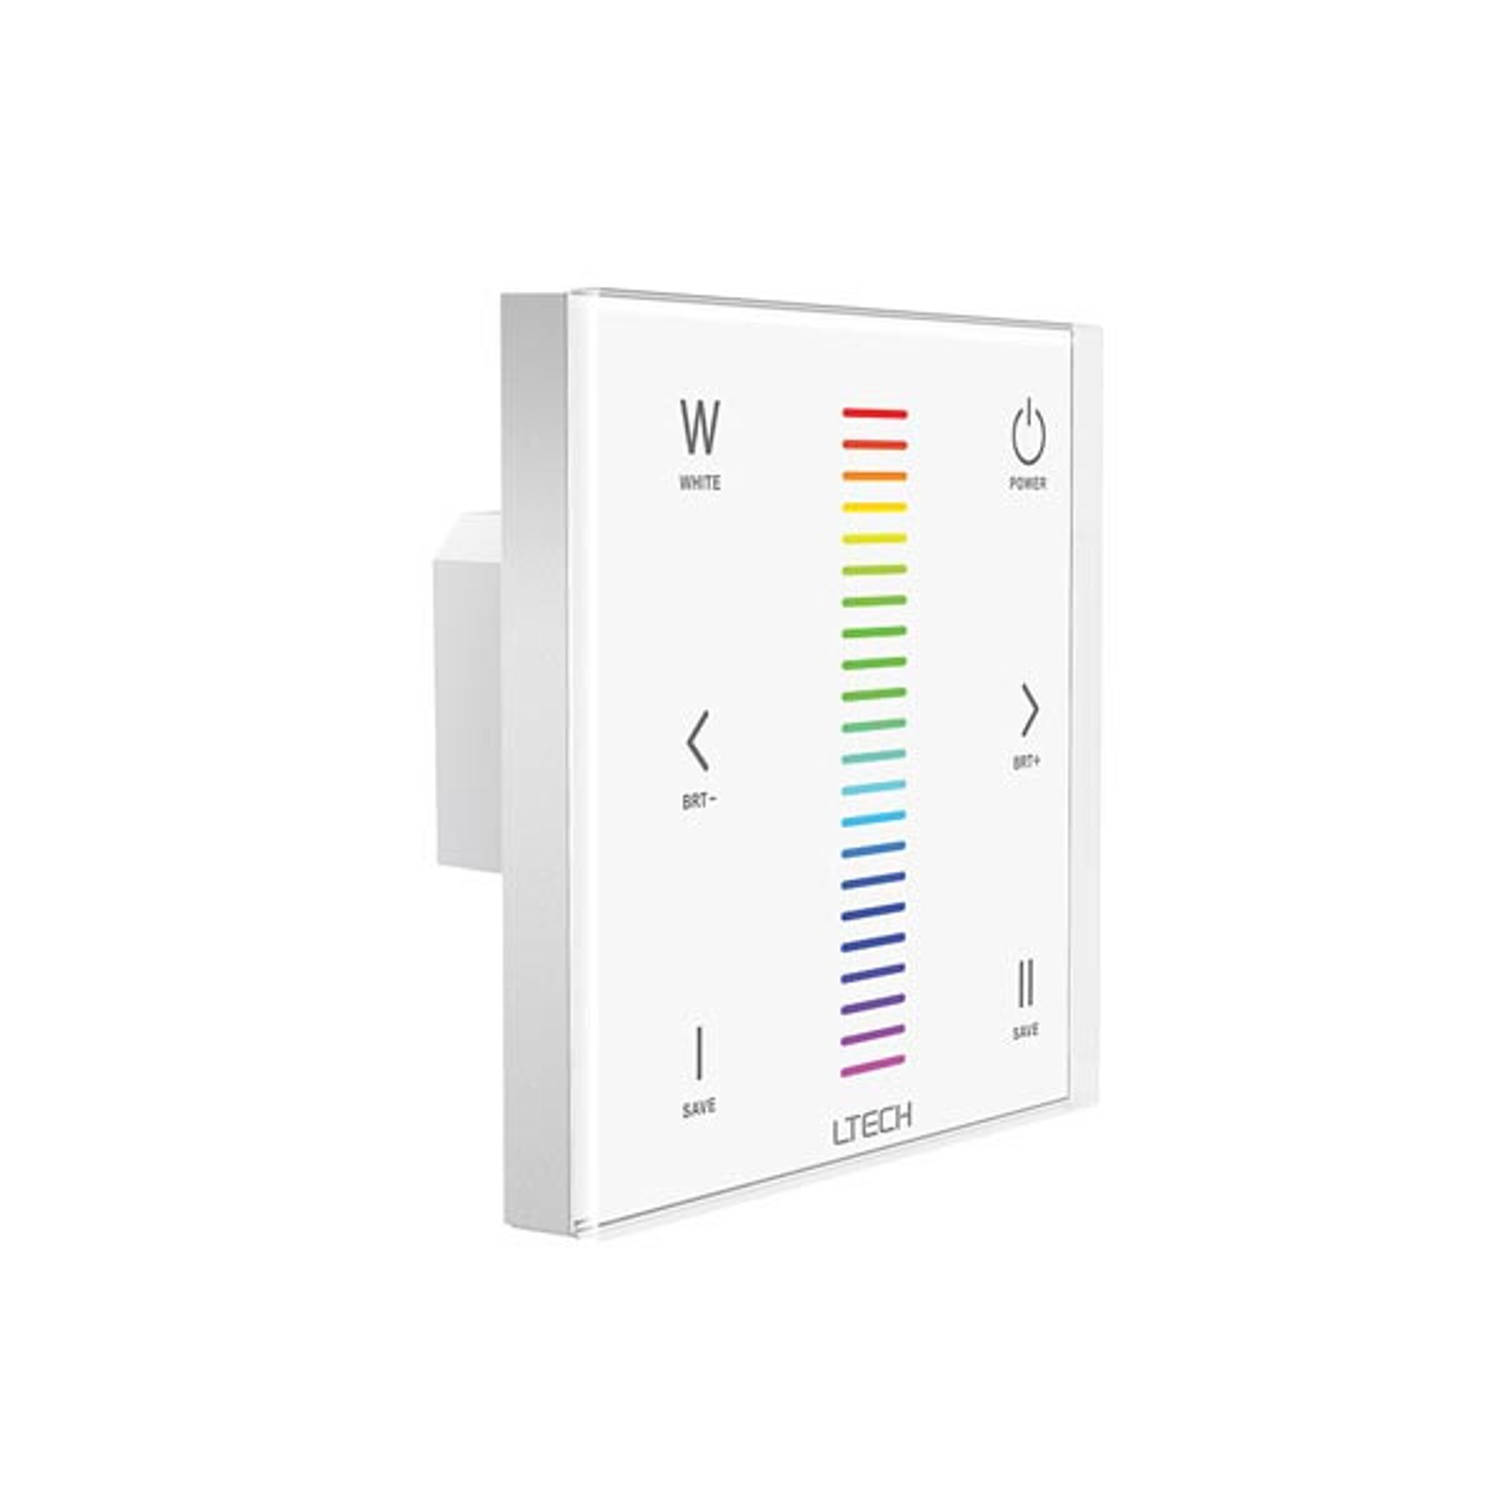 RGBW-led touchpanel dimmer